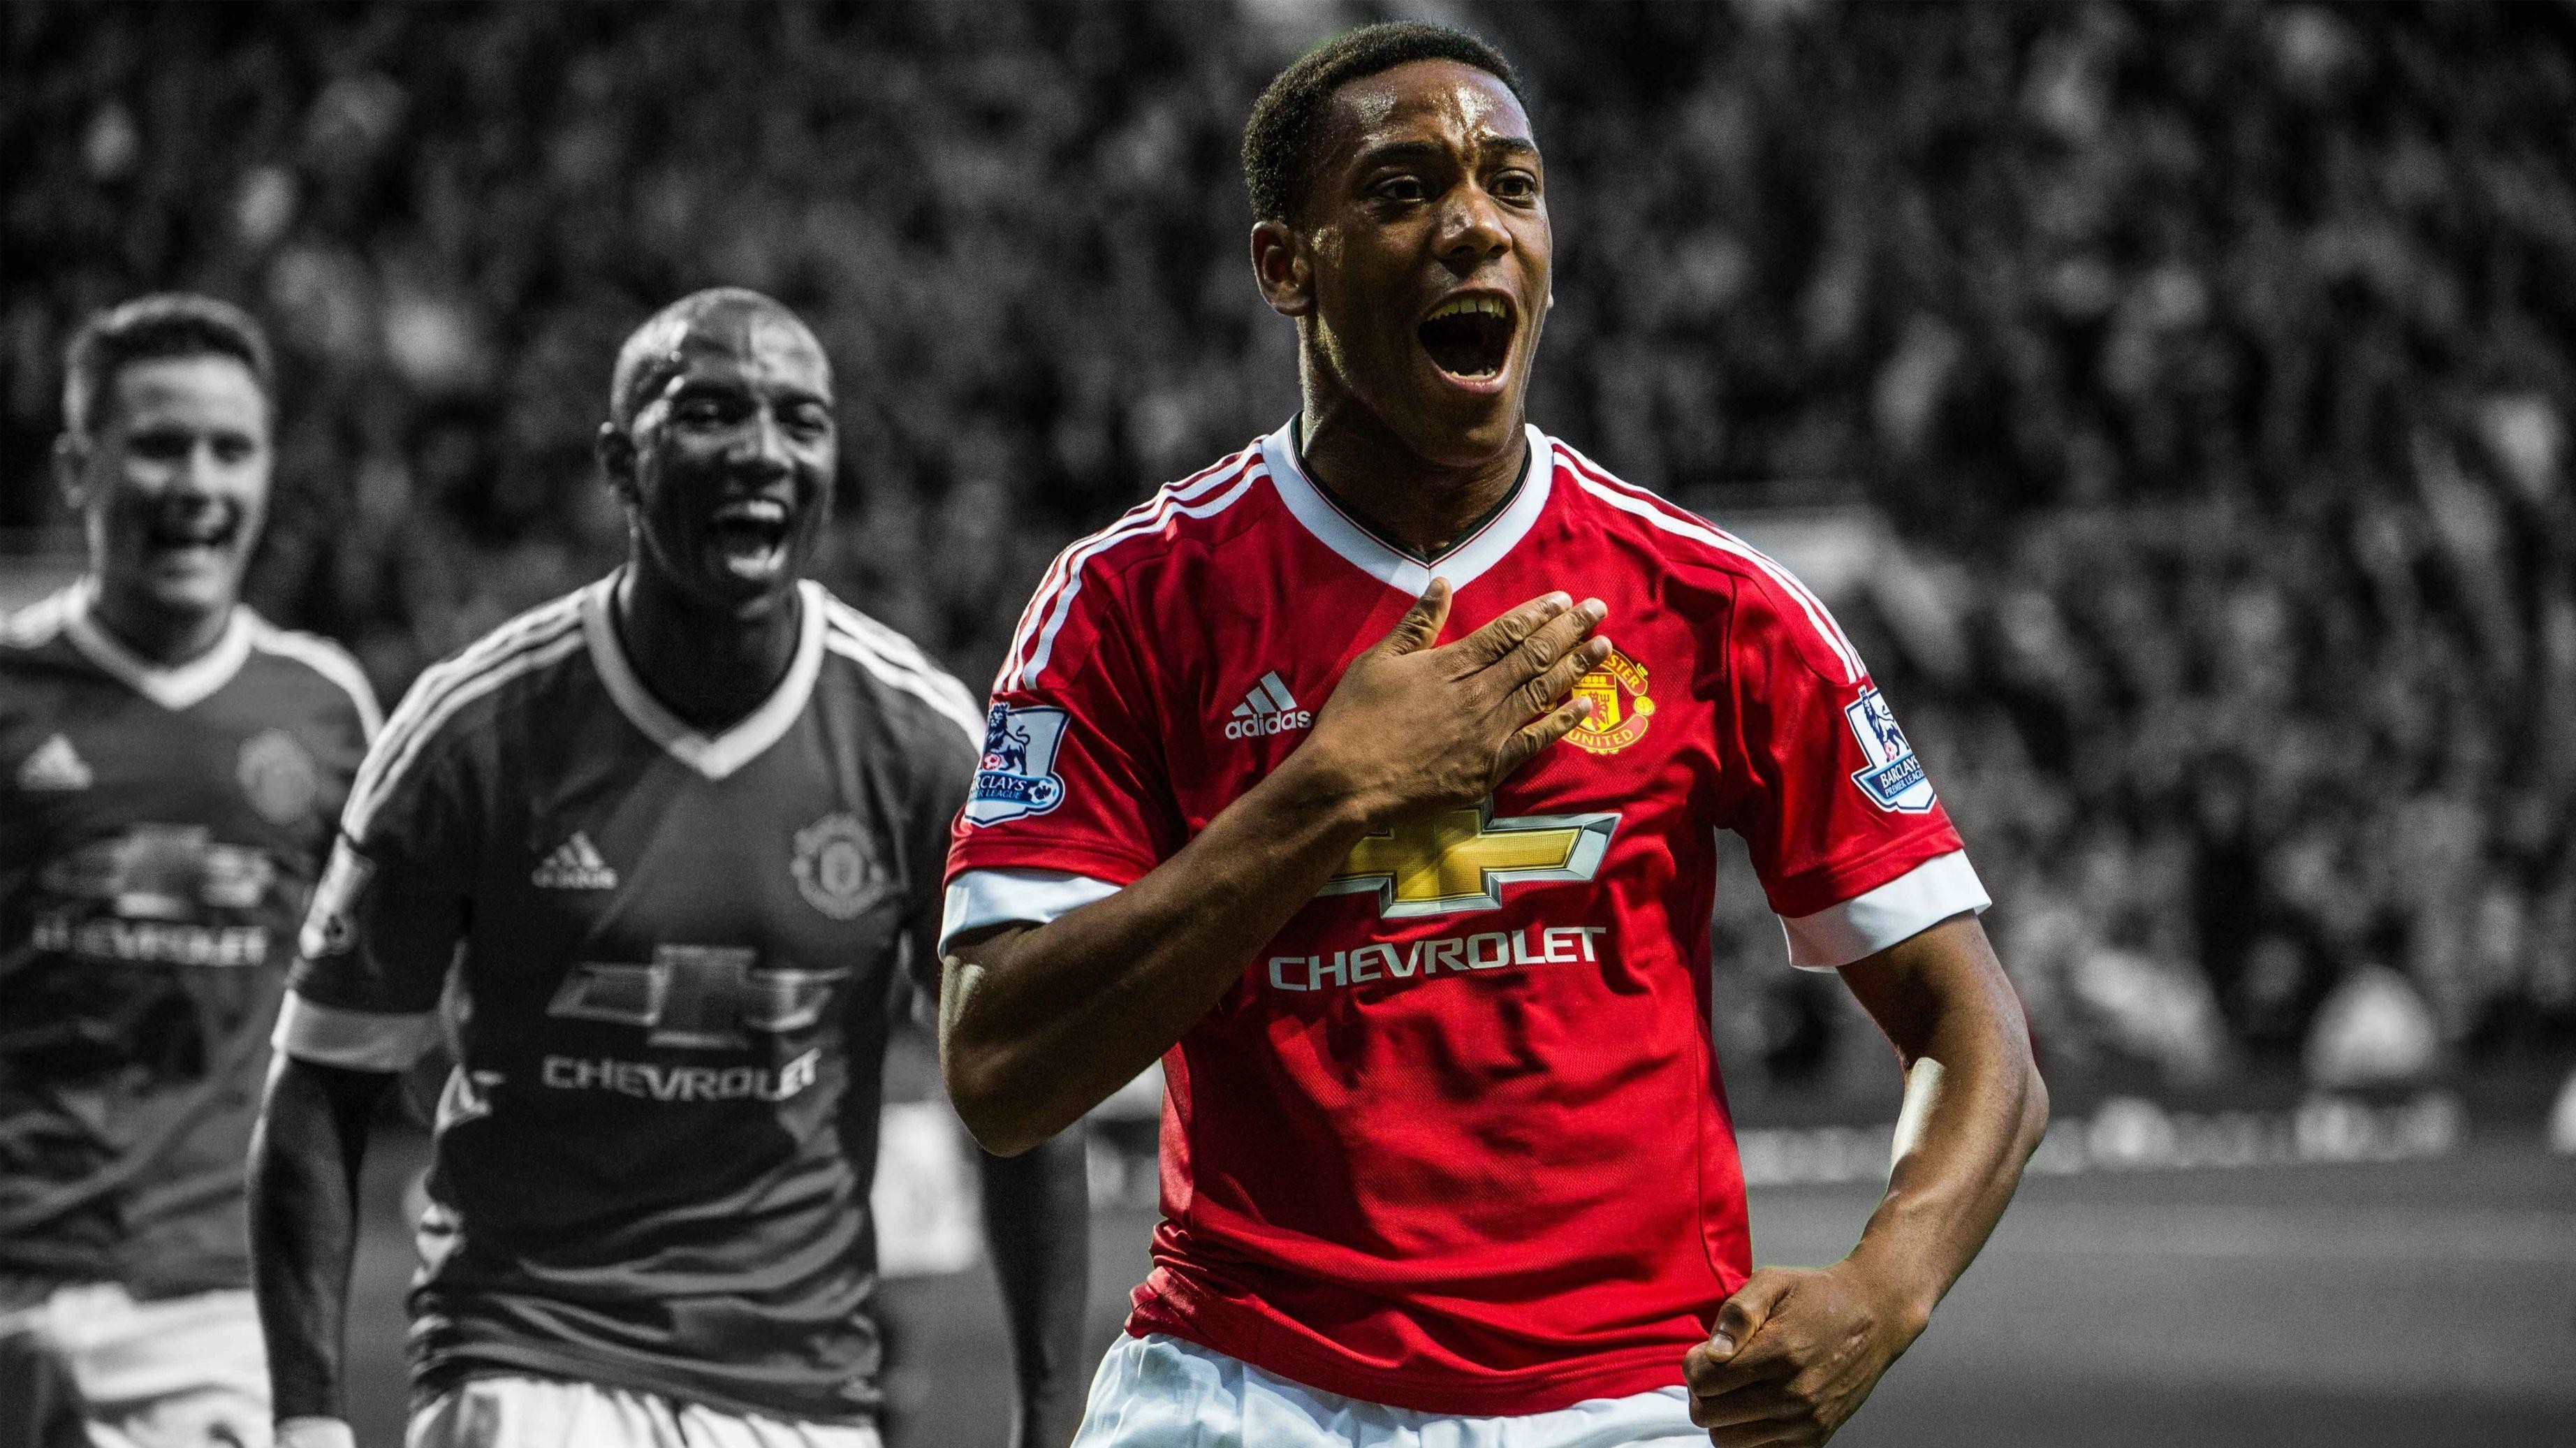 Anthony Martial Wallpaper Image